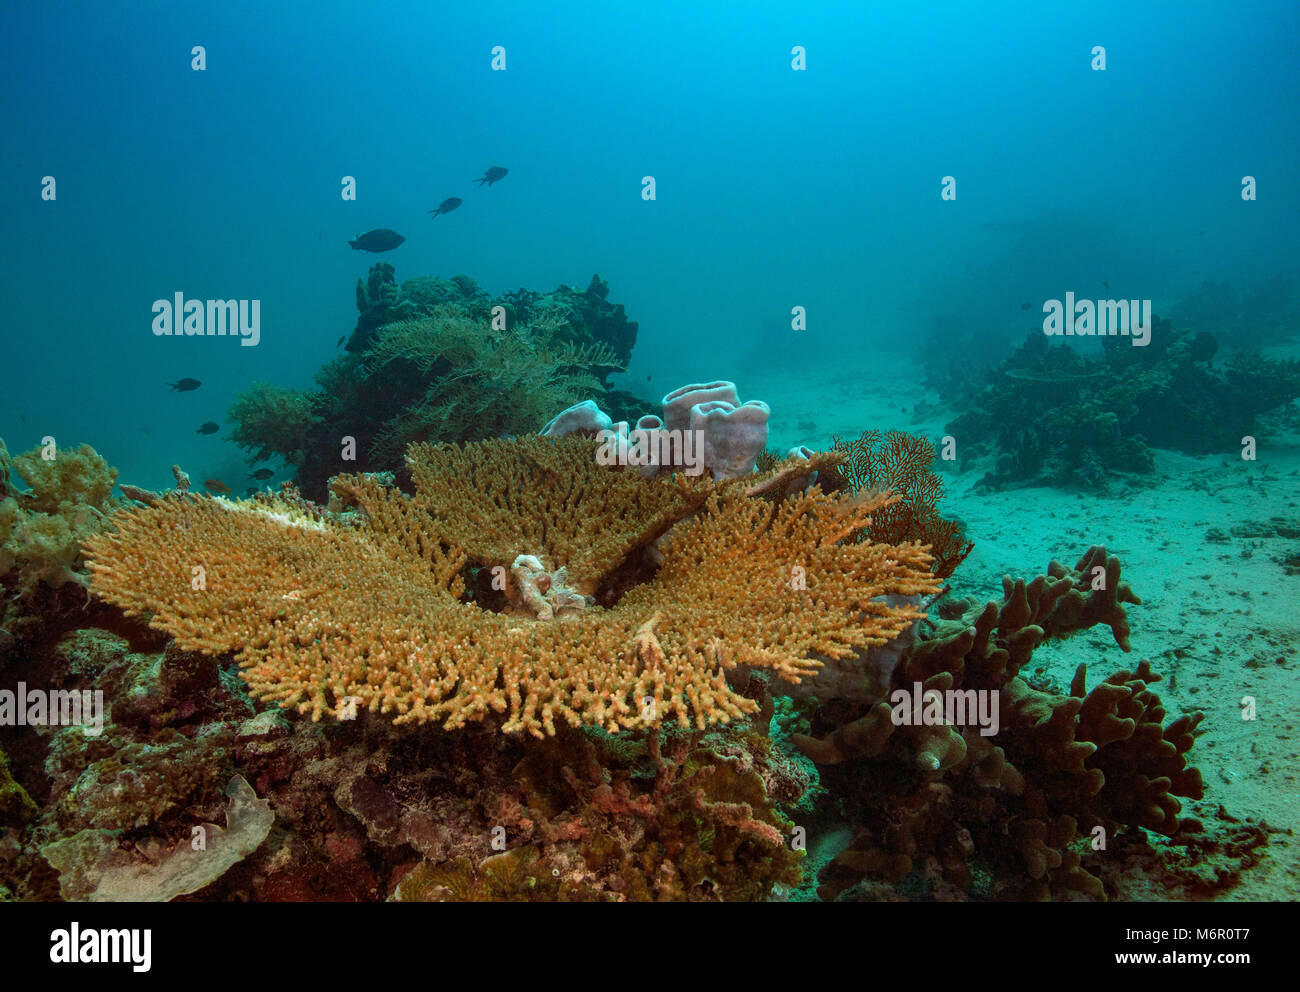 Table coral (Acropora). Picture was taken in the Celebes sea, Indonesia Stock Photo